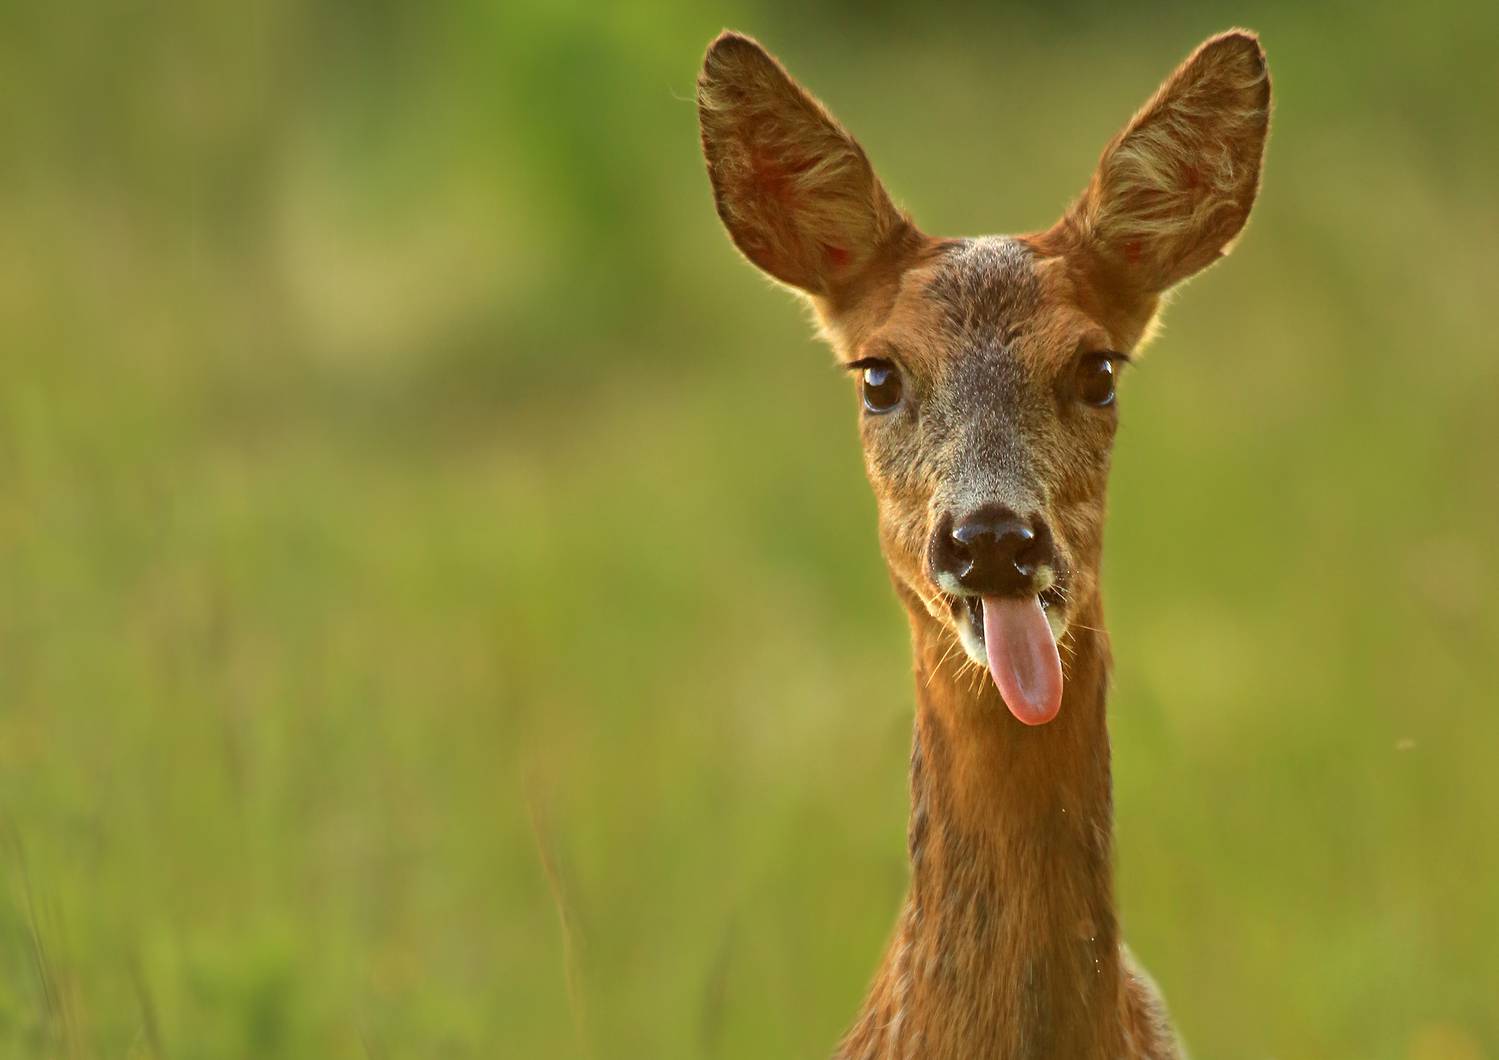 Funny Deer Wallpapers High Quality Download Free